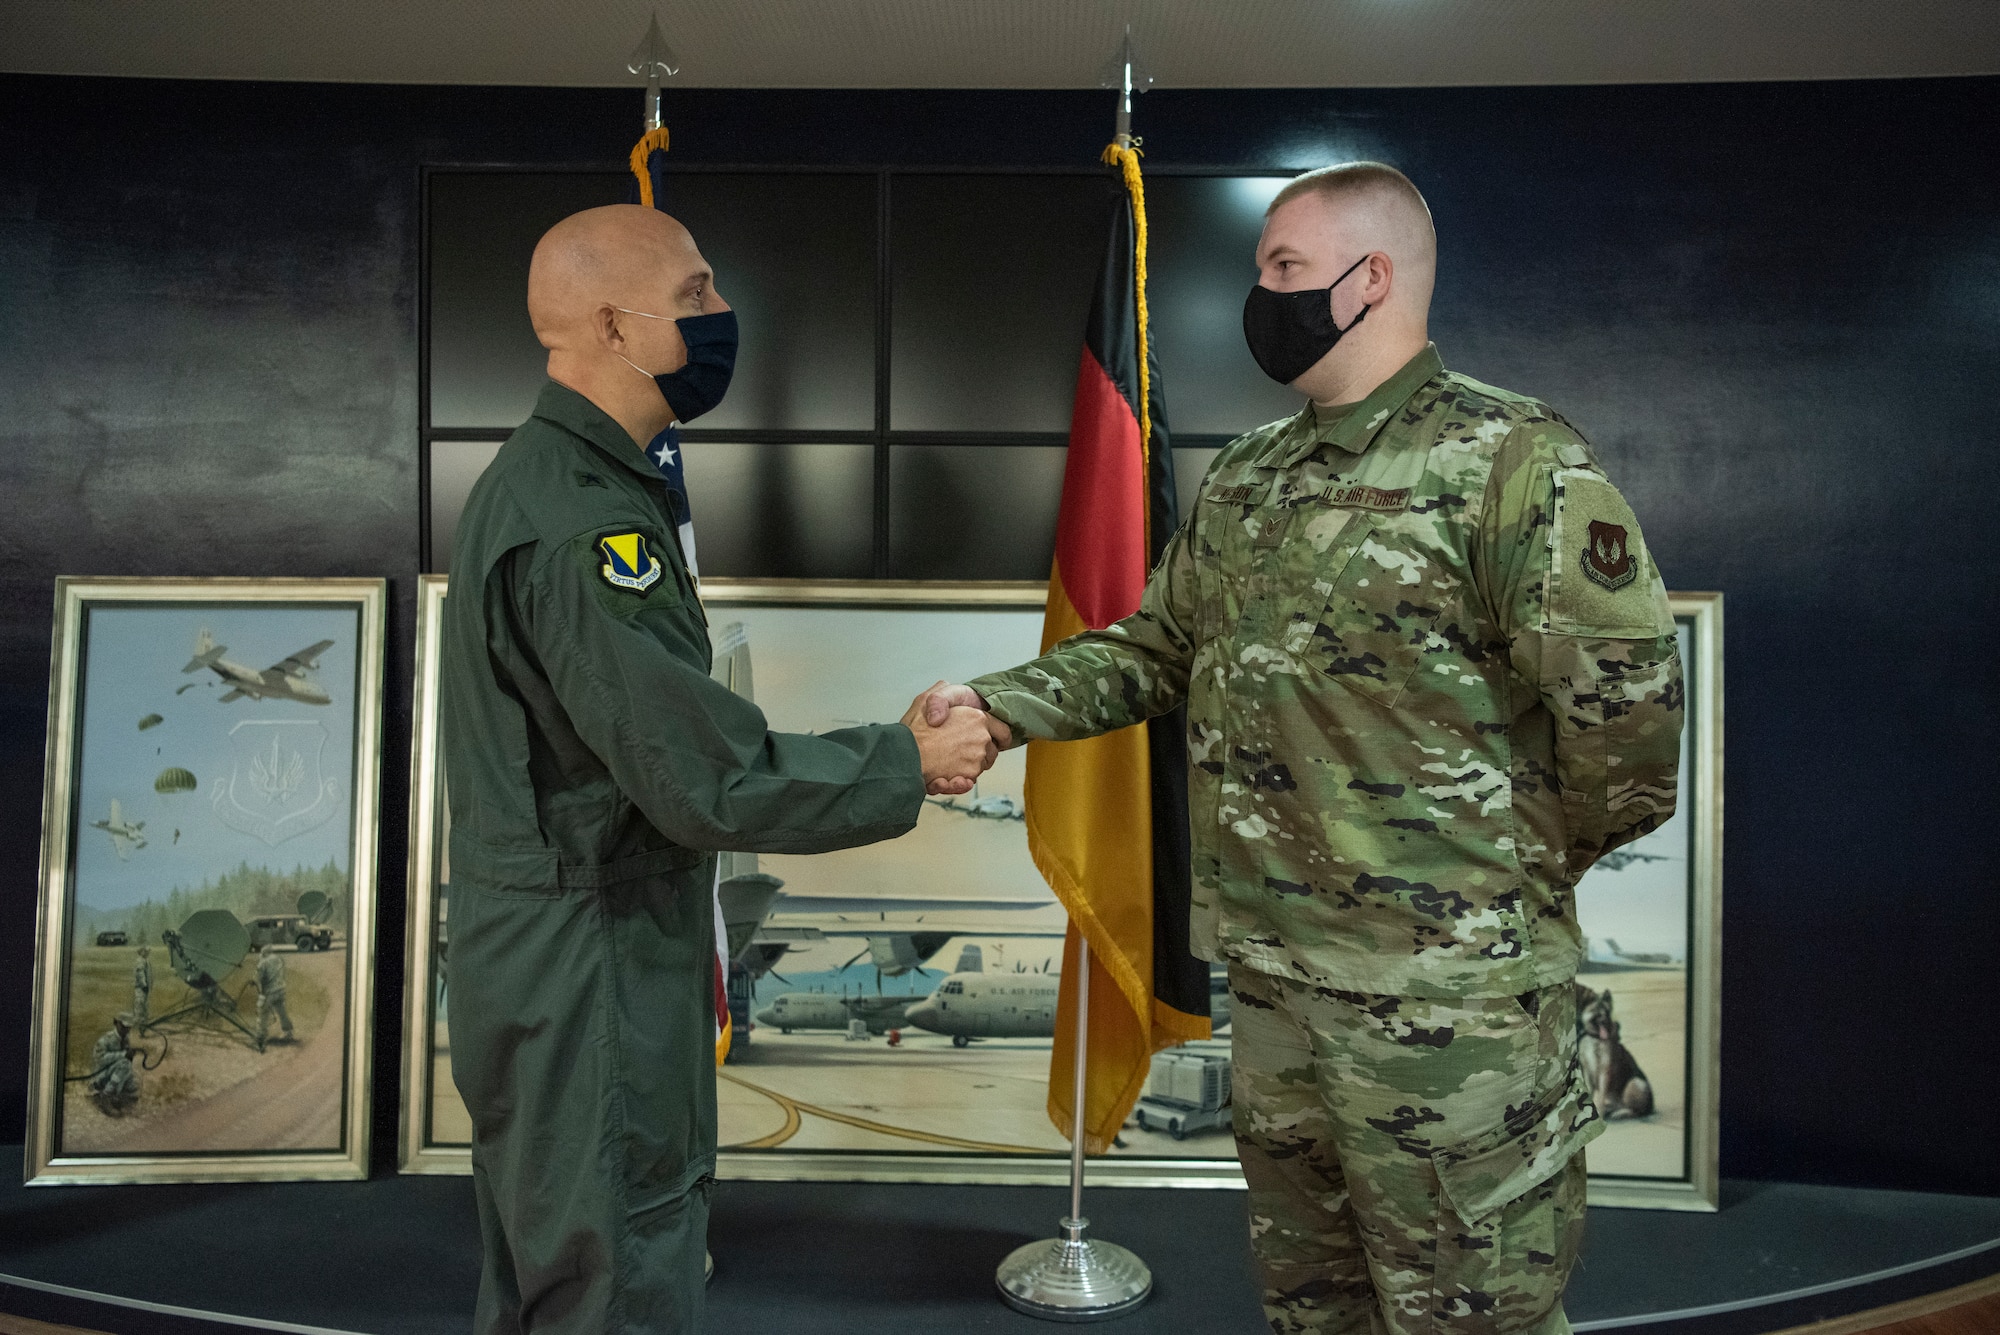 U.S. Air Force Staff Sgt. Tyler D. Nelson, 86th Maintenance Group maintenance operations center senior controller, receives a coin from Brig. Gen. Josh M. Olson, 86th Airlift Wing commander, at Ramstein Air Base, Germany, Oct. 23, 2020.